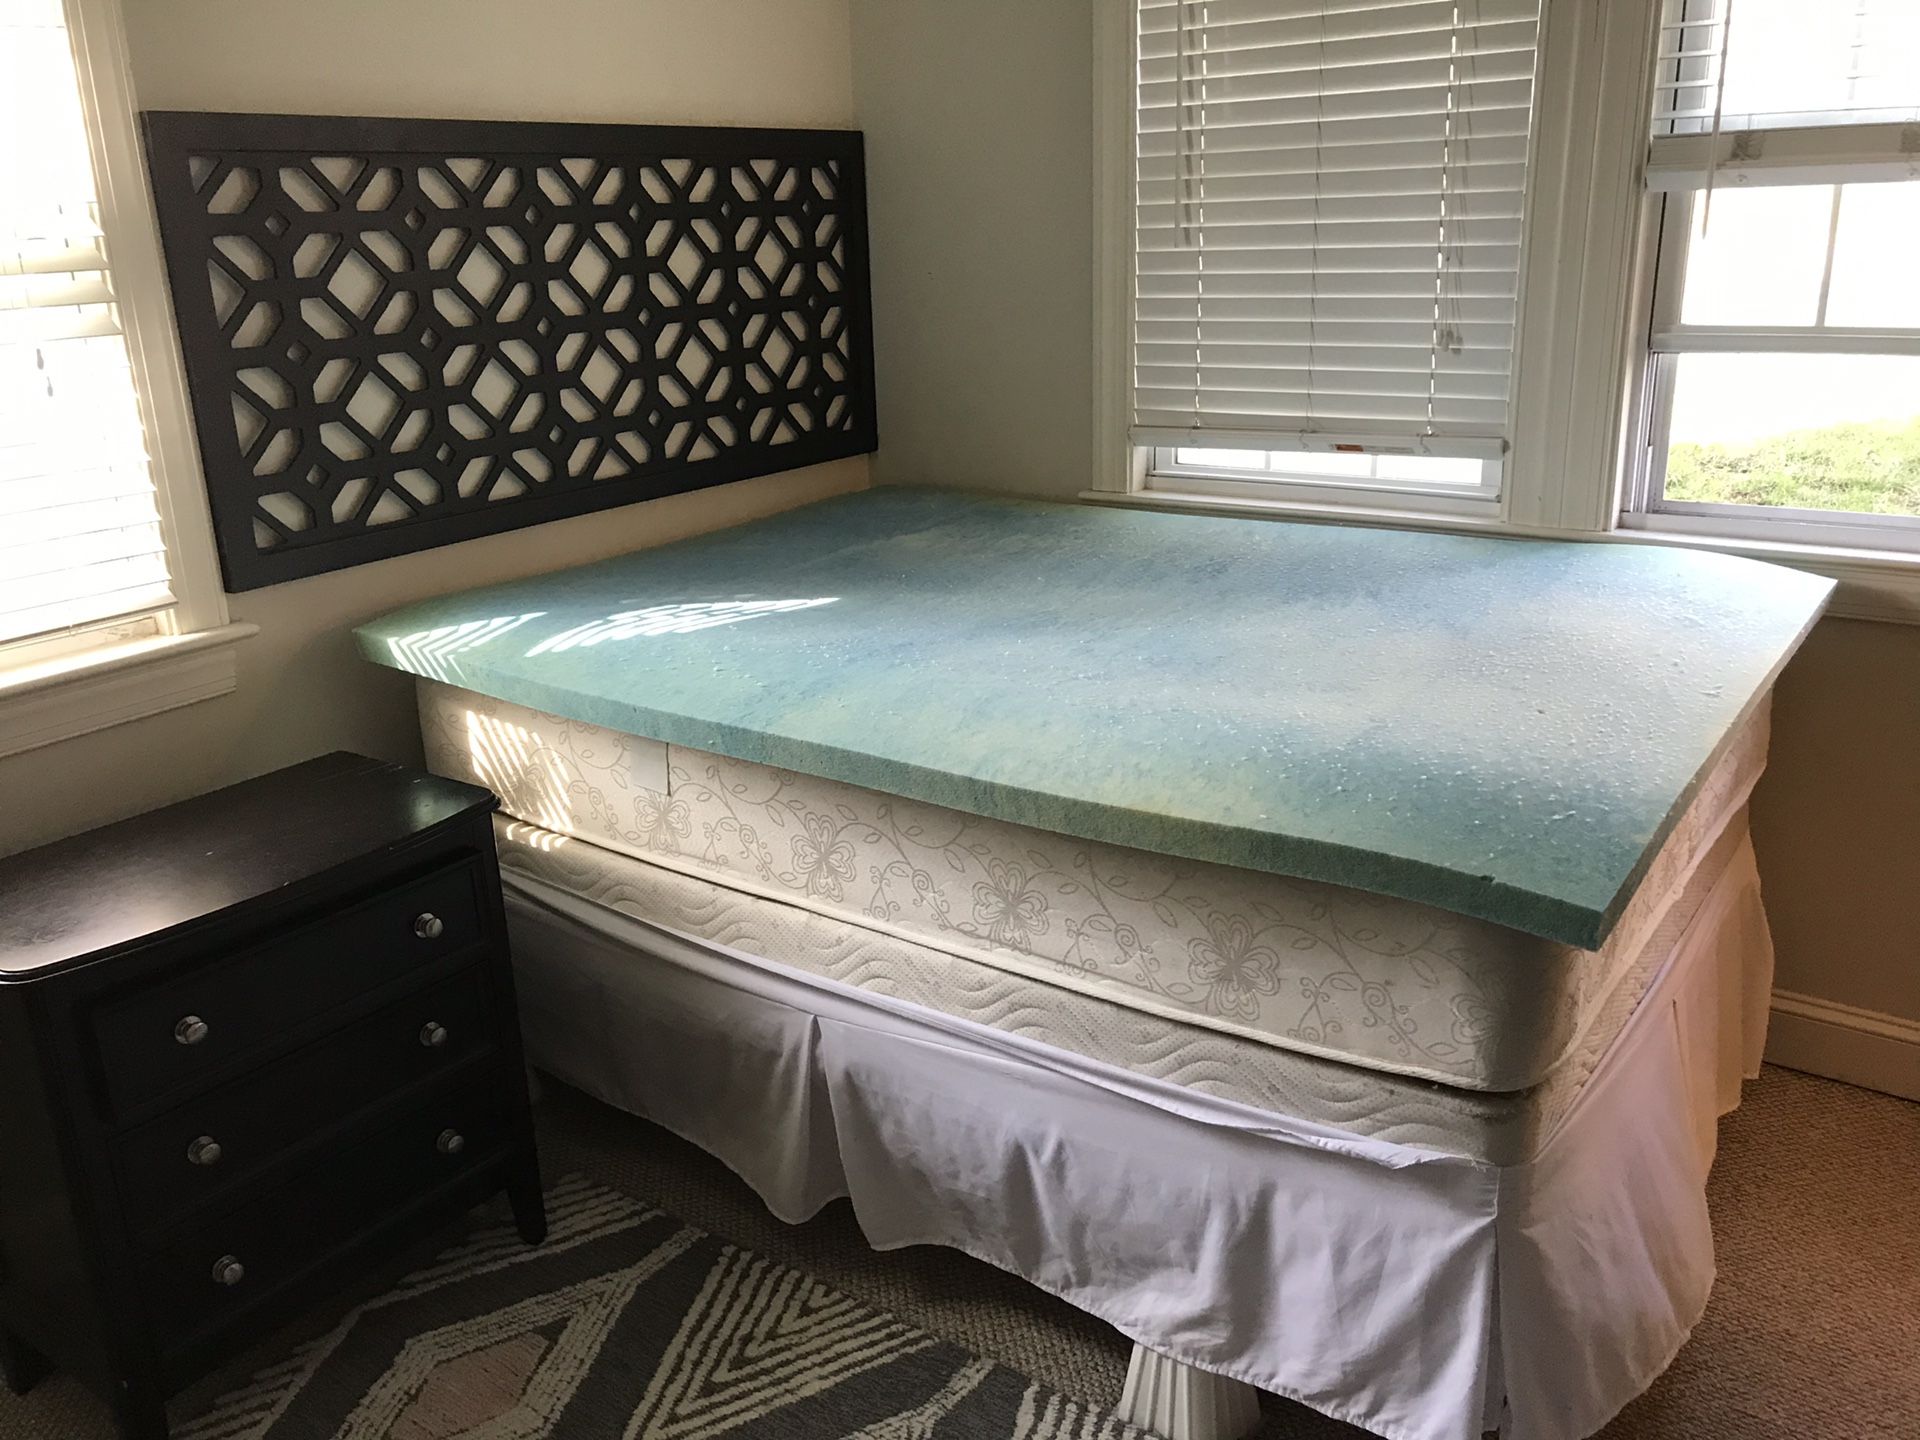 Full sized firm Beautyrest bed with box spring, bed frame, and stilts